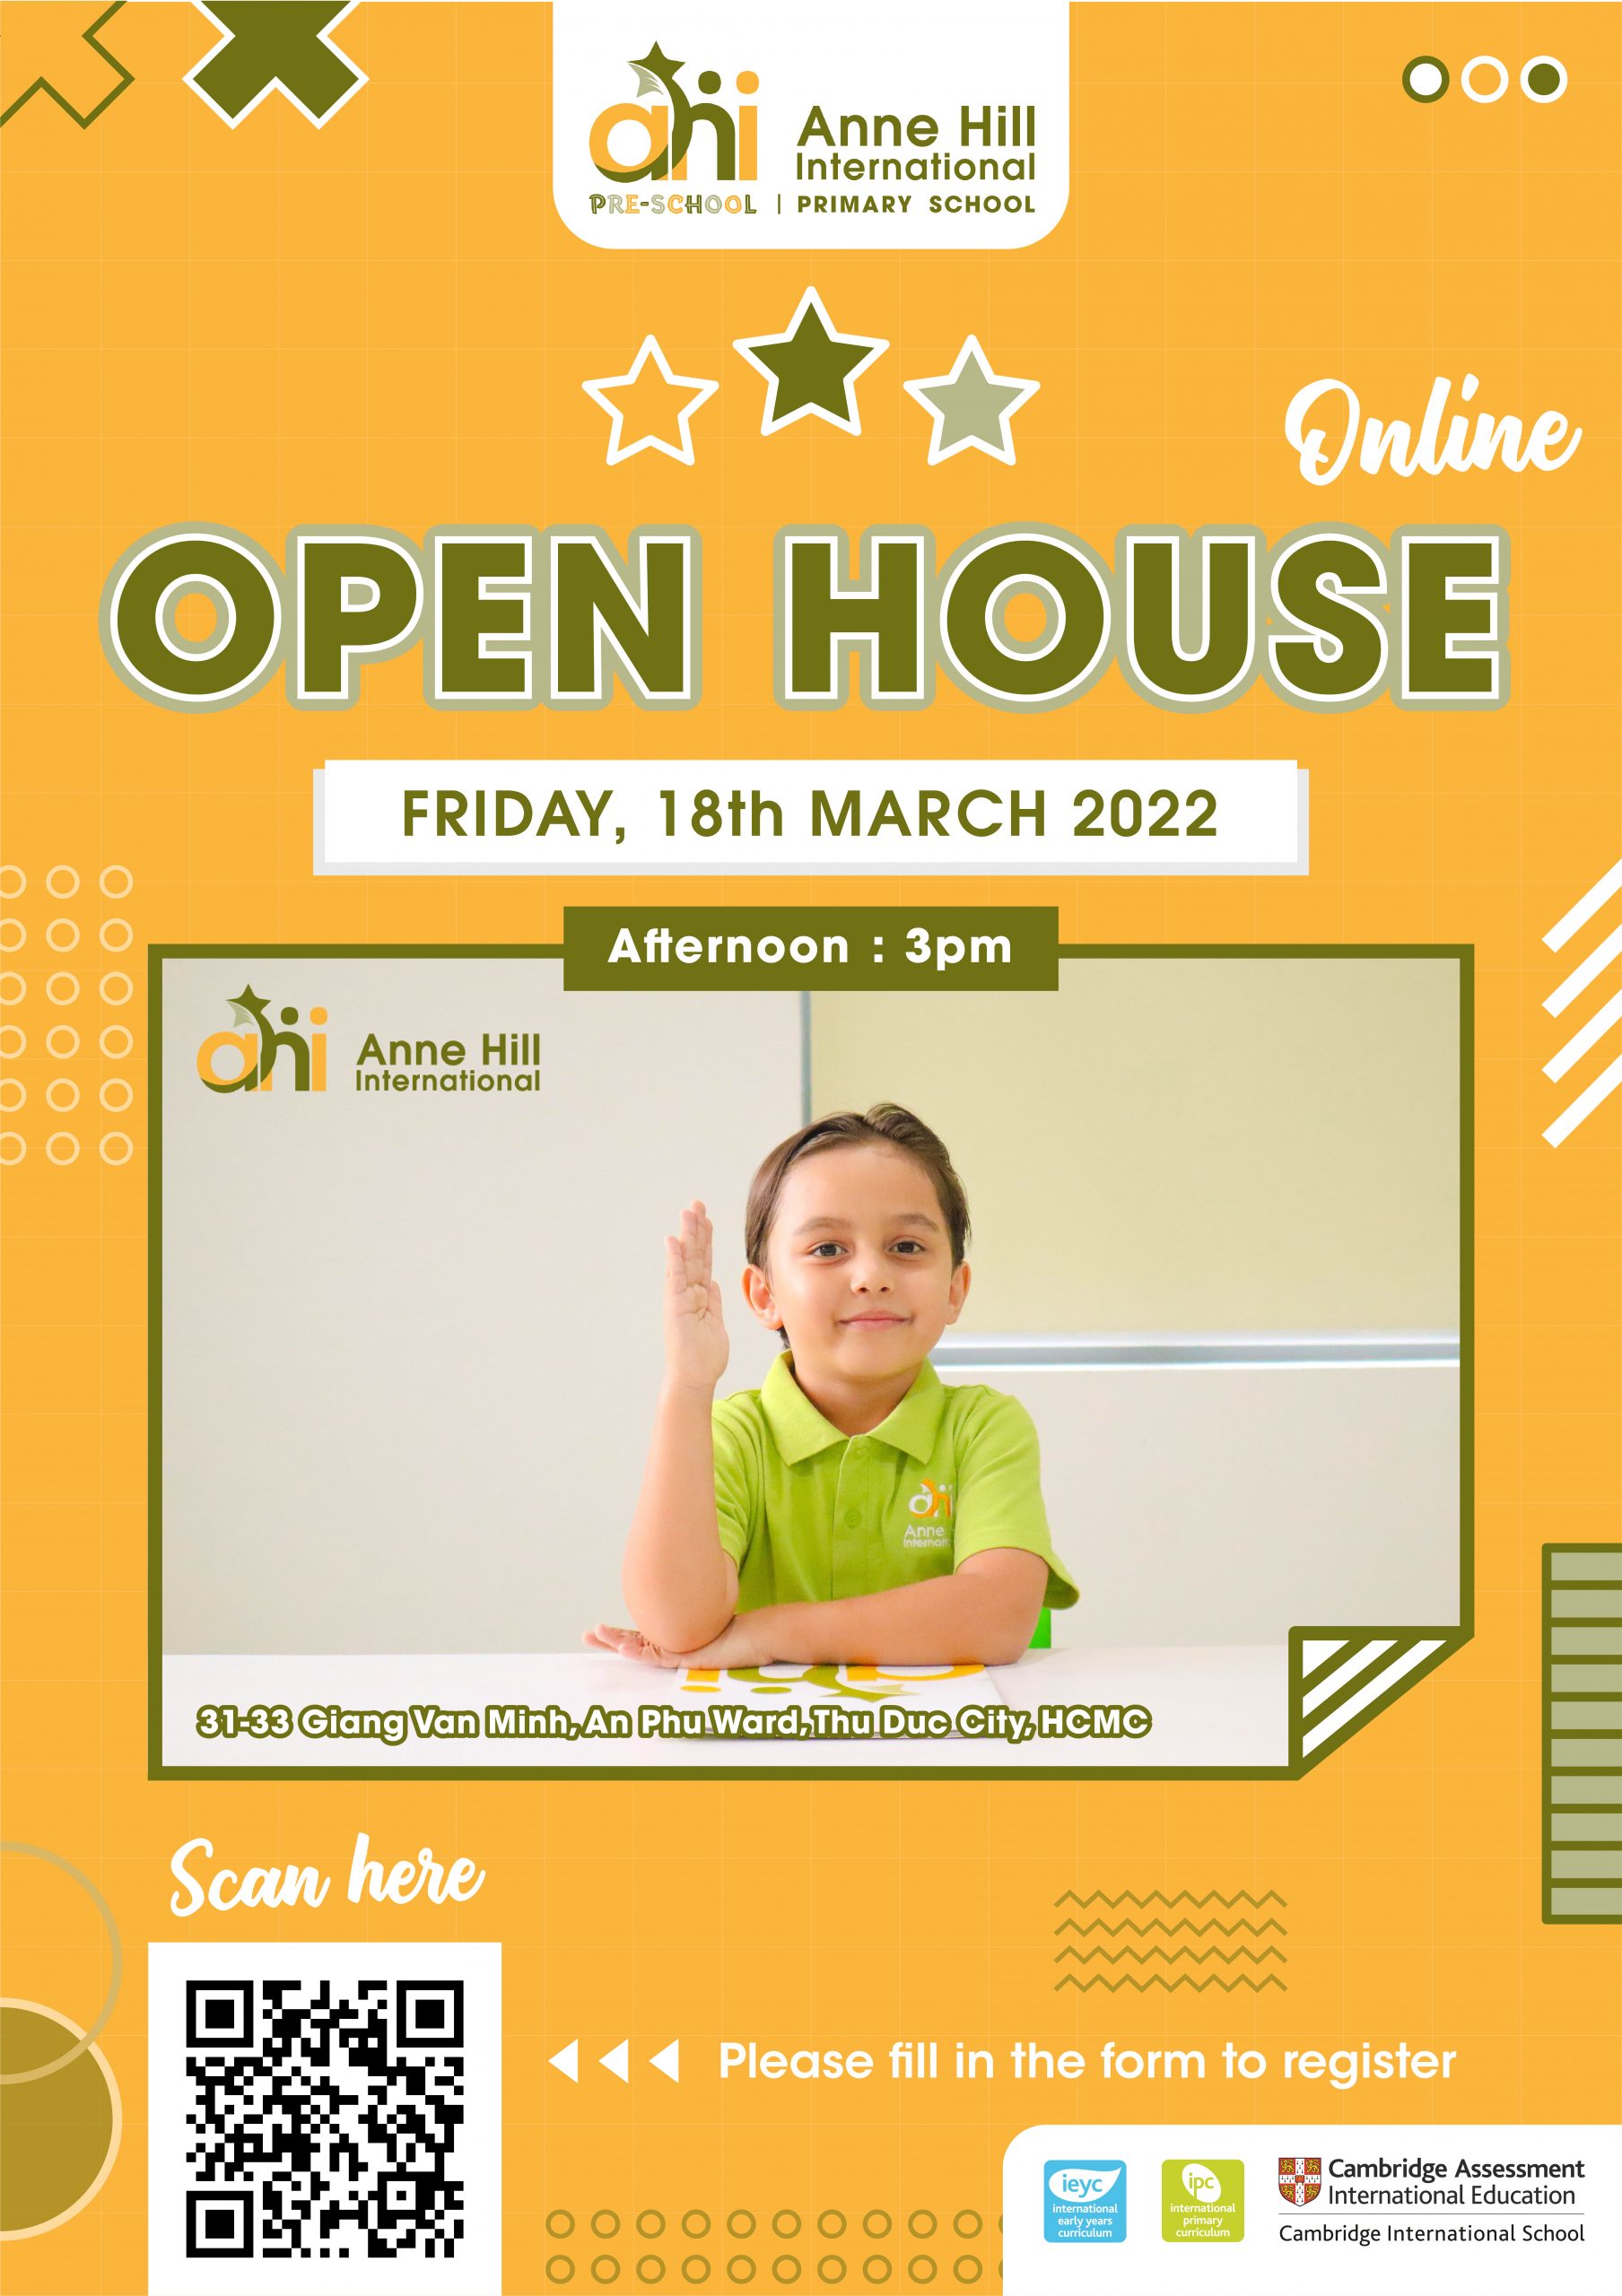 2022 OPEN HOUSE ONLINE EVENT AT AHI!